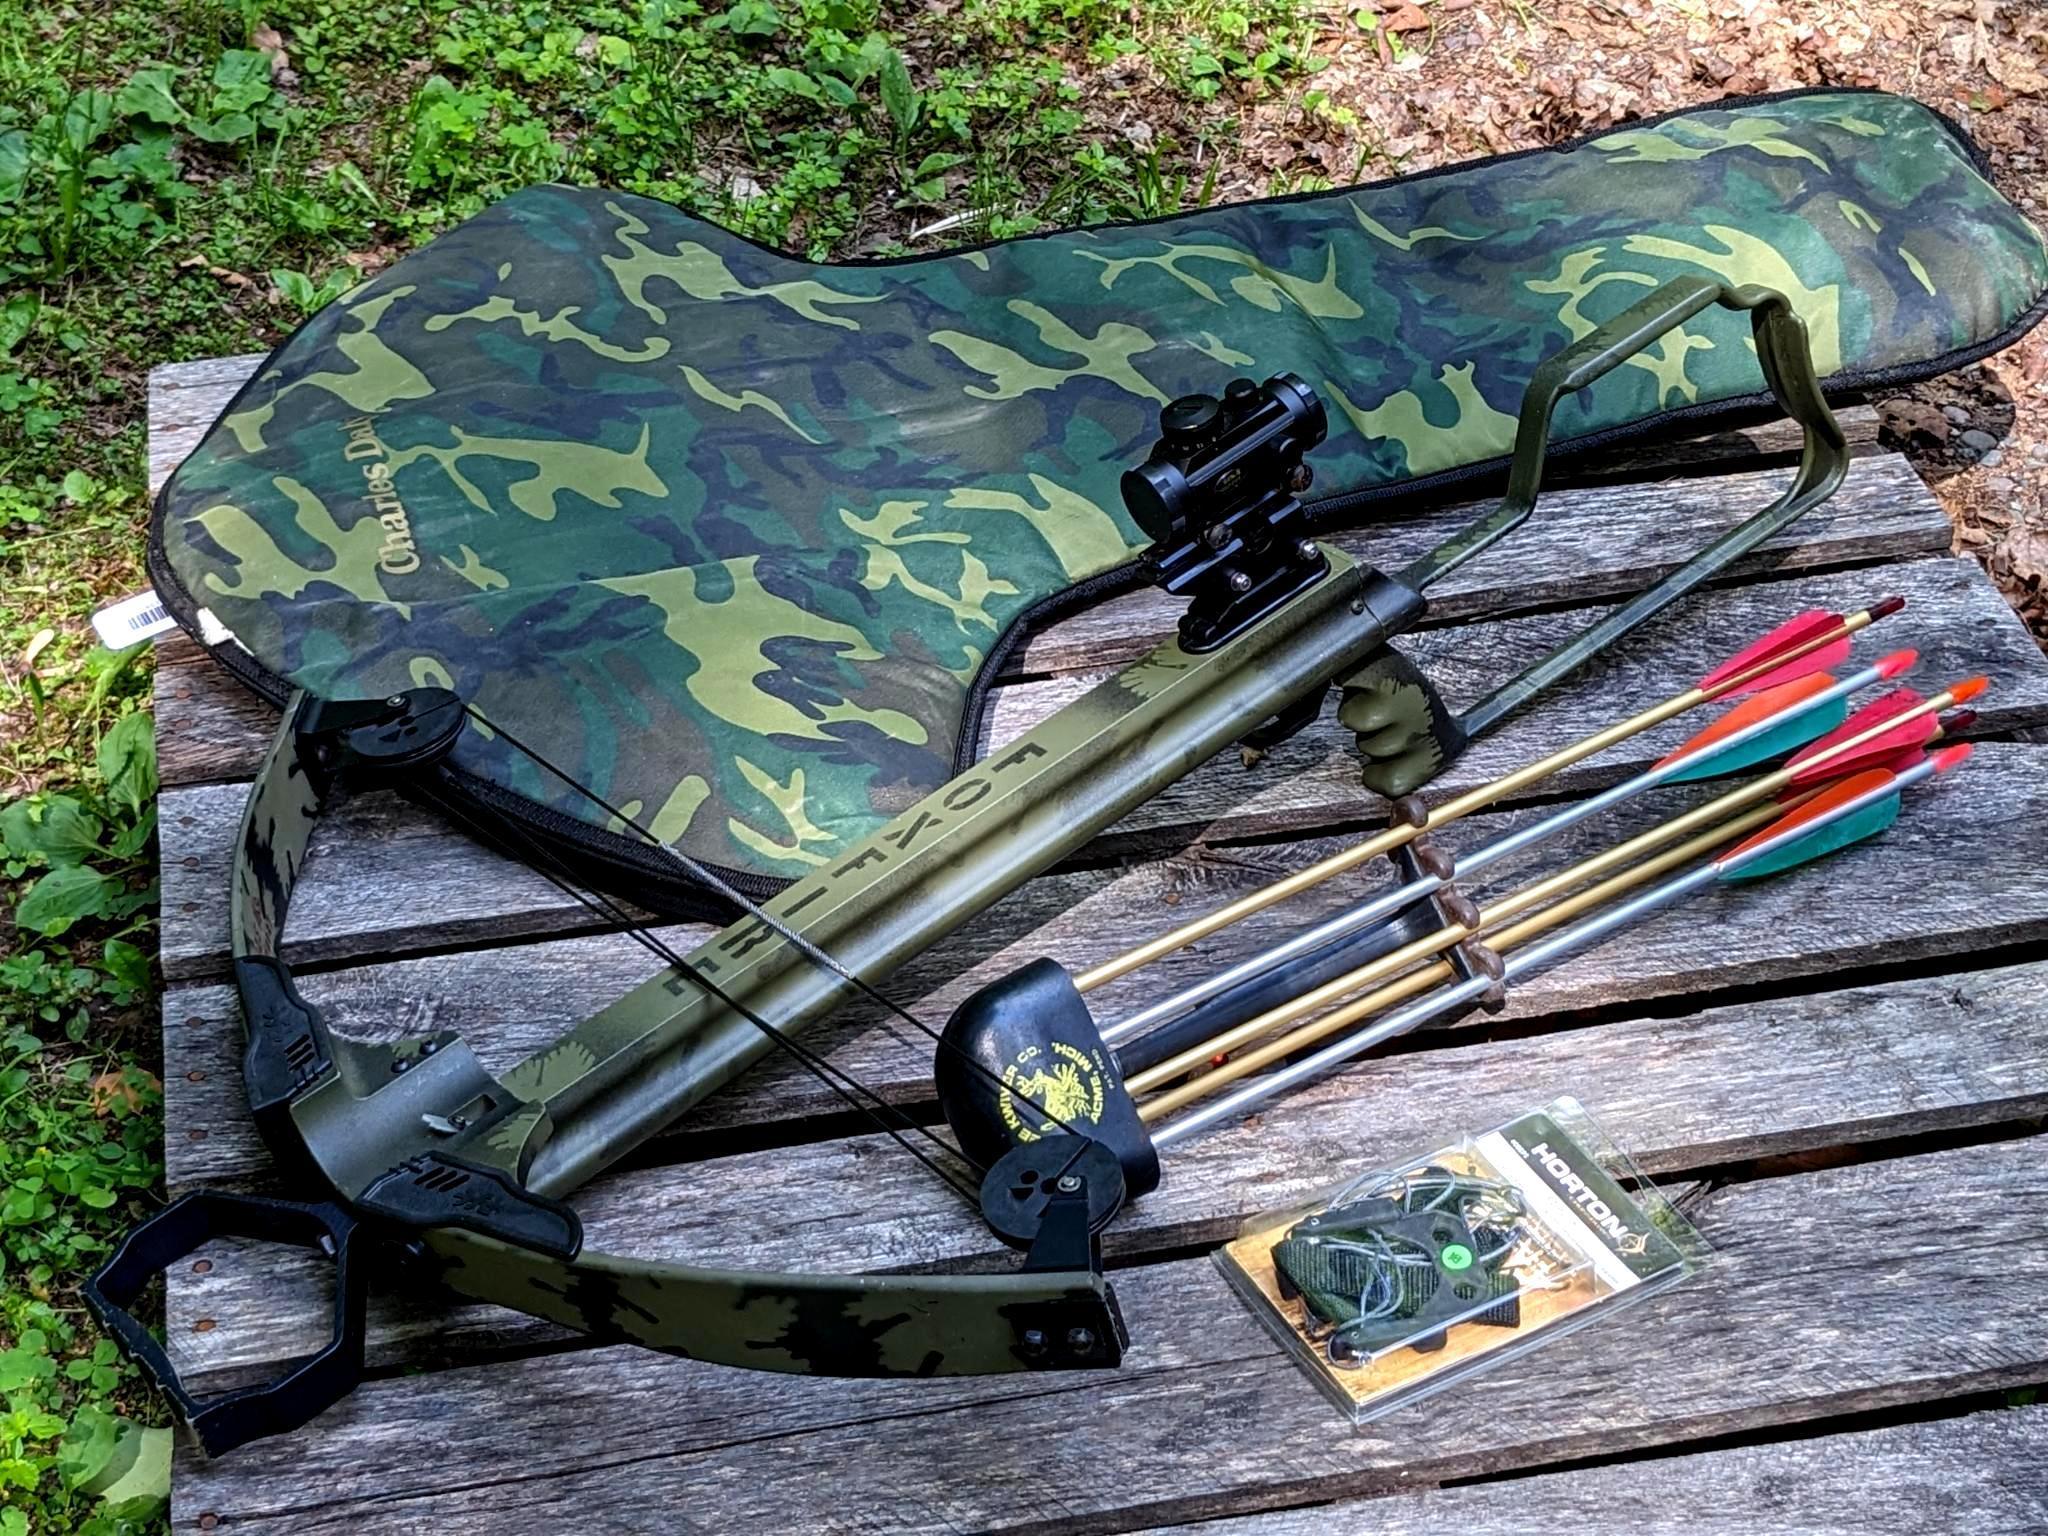 PSE Foxfire cross bow with five bolts, quiver, Horton cocking harness and Charles Daly case.